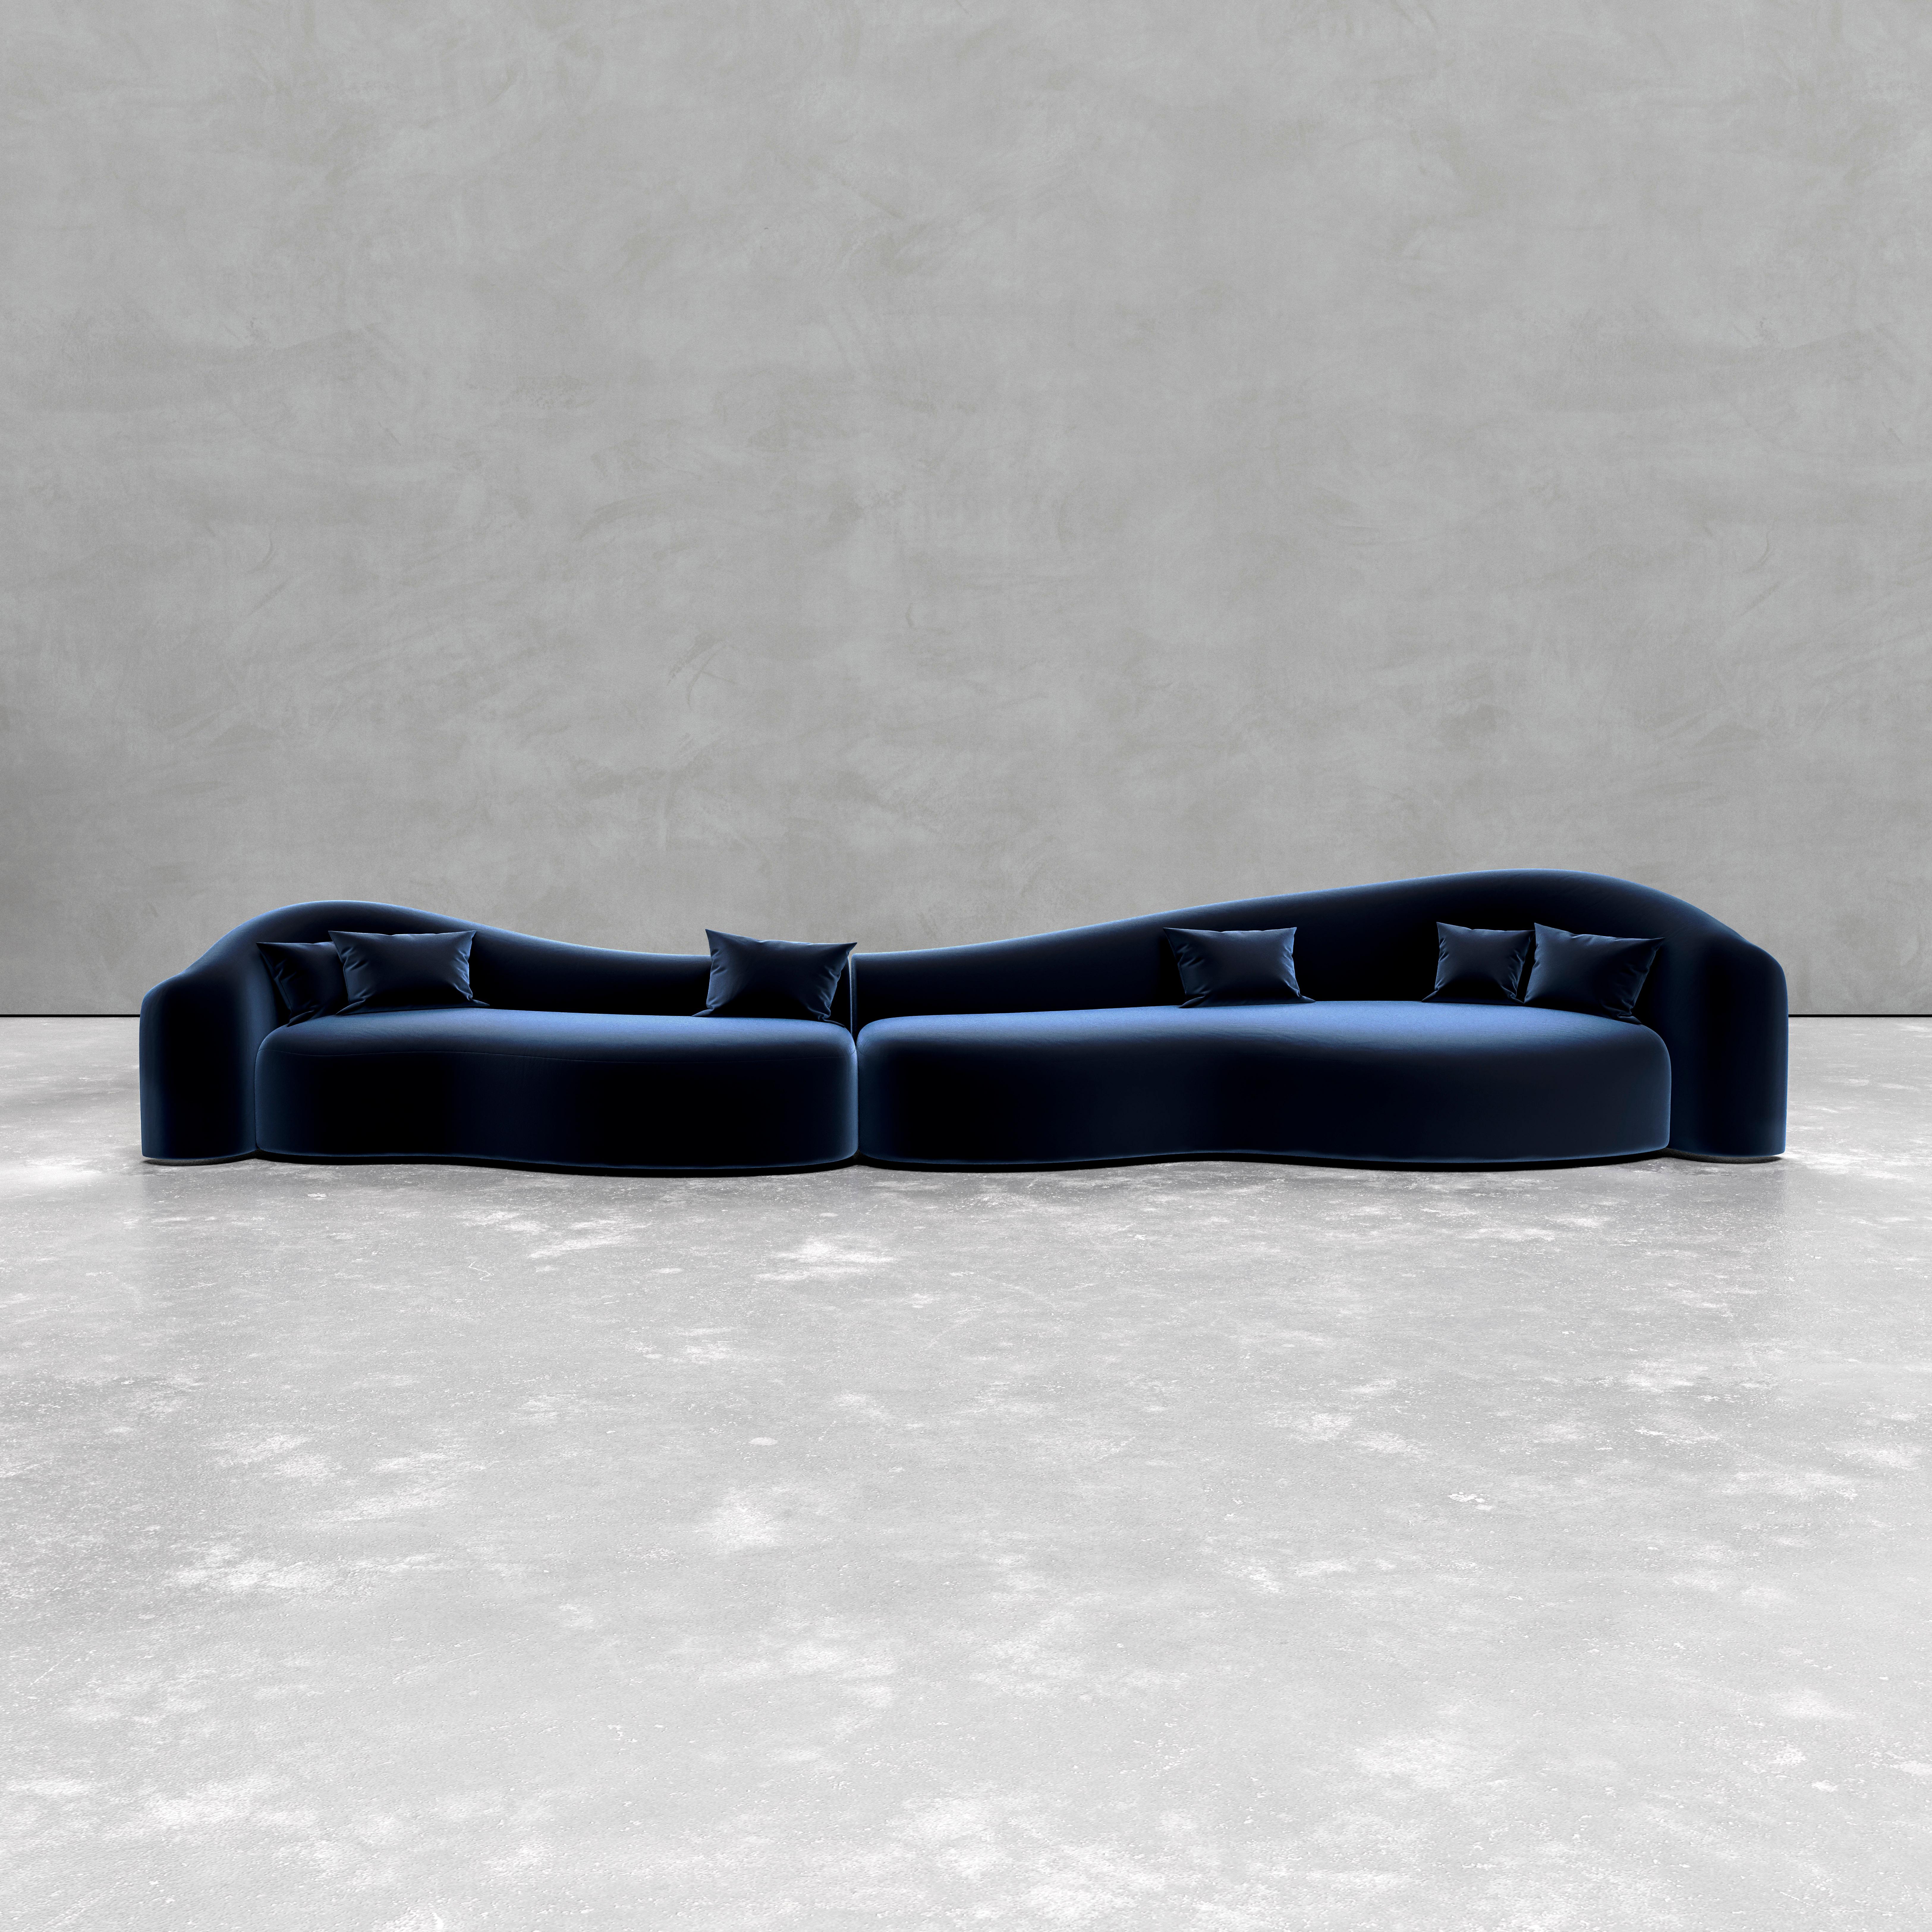 Sofa Baïne by Jerome Bugara Editions 
Limited Edition 50, Signed, serial number and certificate of Authenticity.
Lelièvre navy velvet seat. 6 cushion included.
Made in Portugal

100cm seat depth for incomparable comfort

The curves of the Baïne